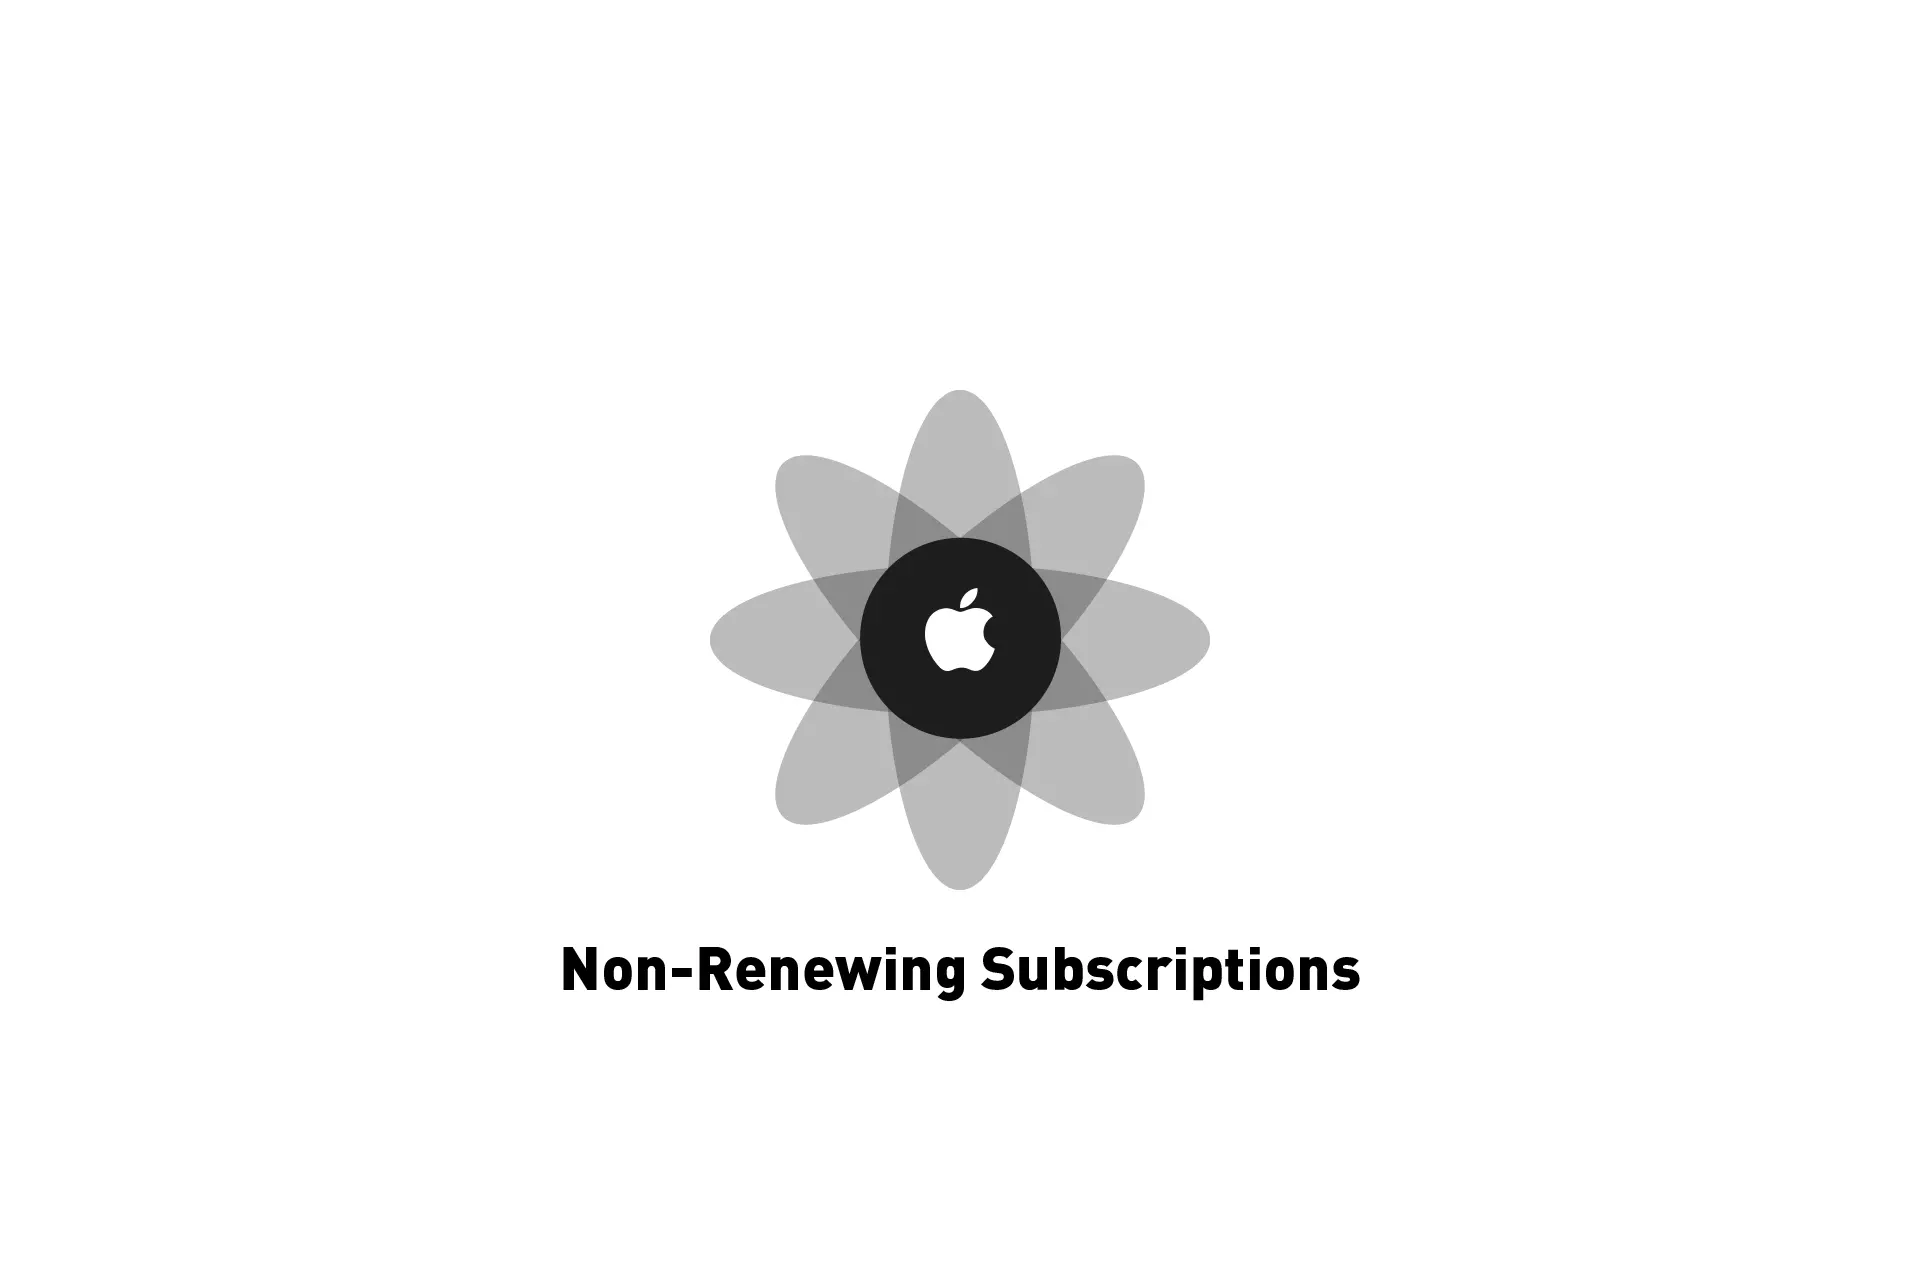 A flower that represents Apple with the text "Non-Renewing Subscriptions" beneath it.